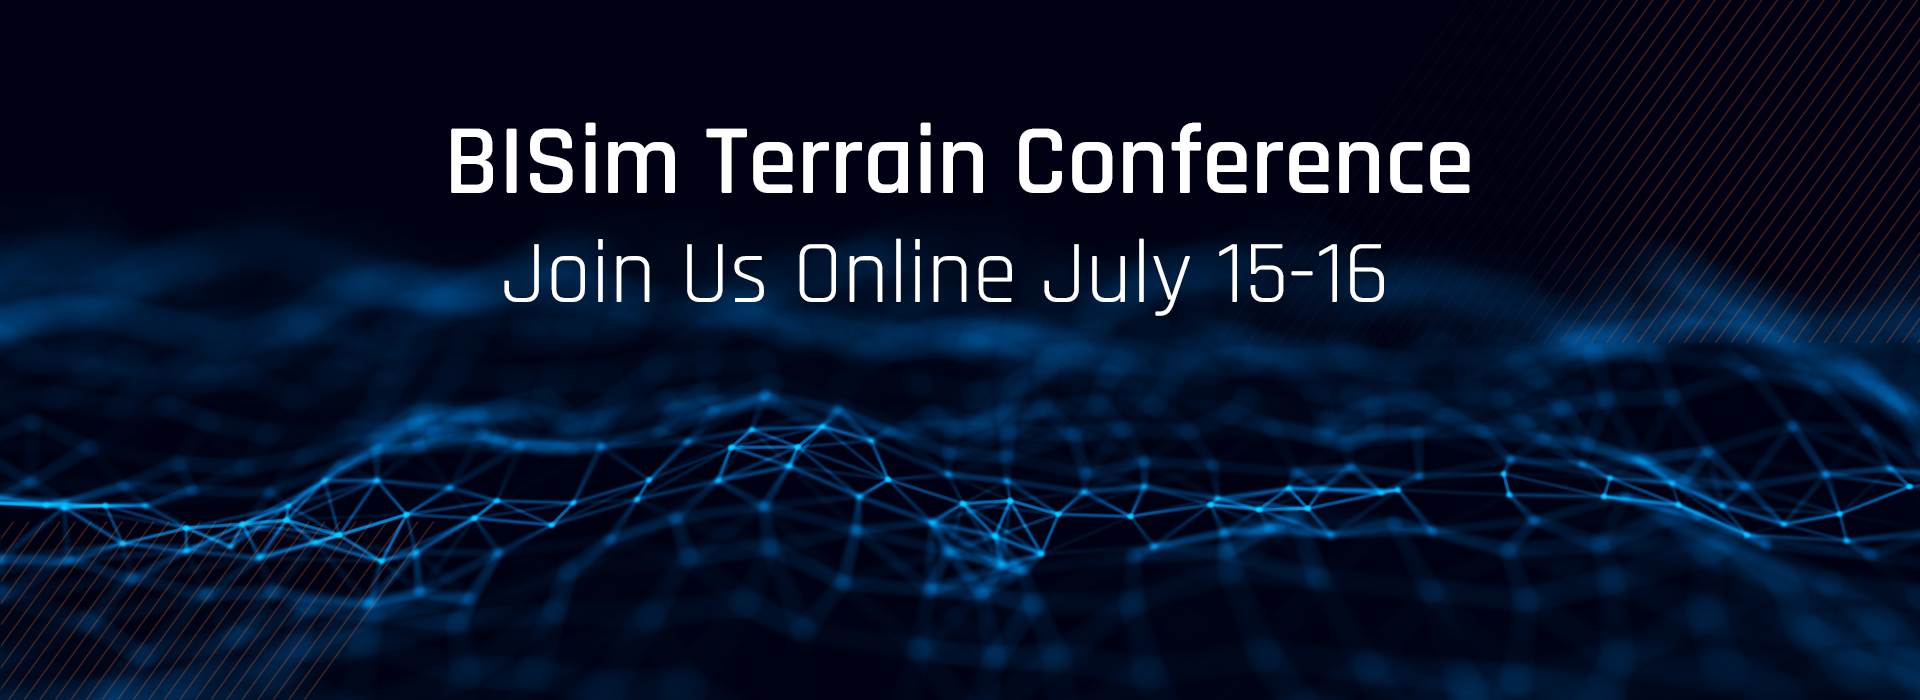 new_online_bisim_terrain_conference_kicks_off_july_15_16_to_highlight_cloud_capable_open_world_server_technologies